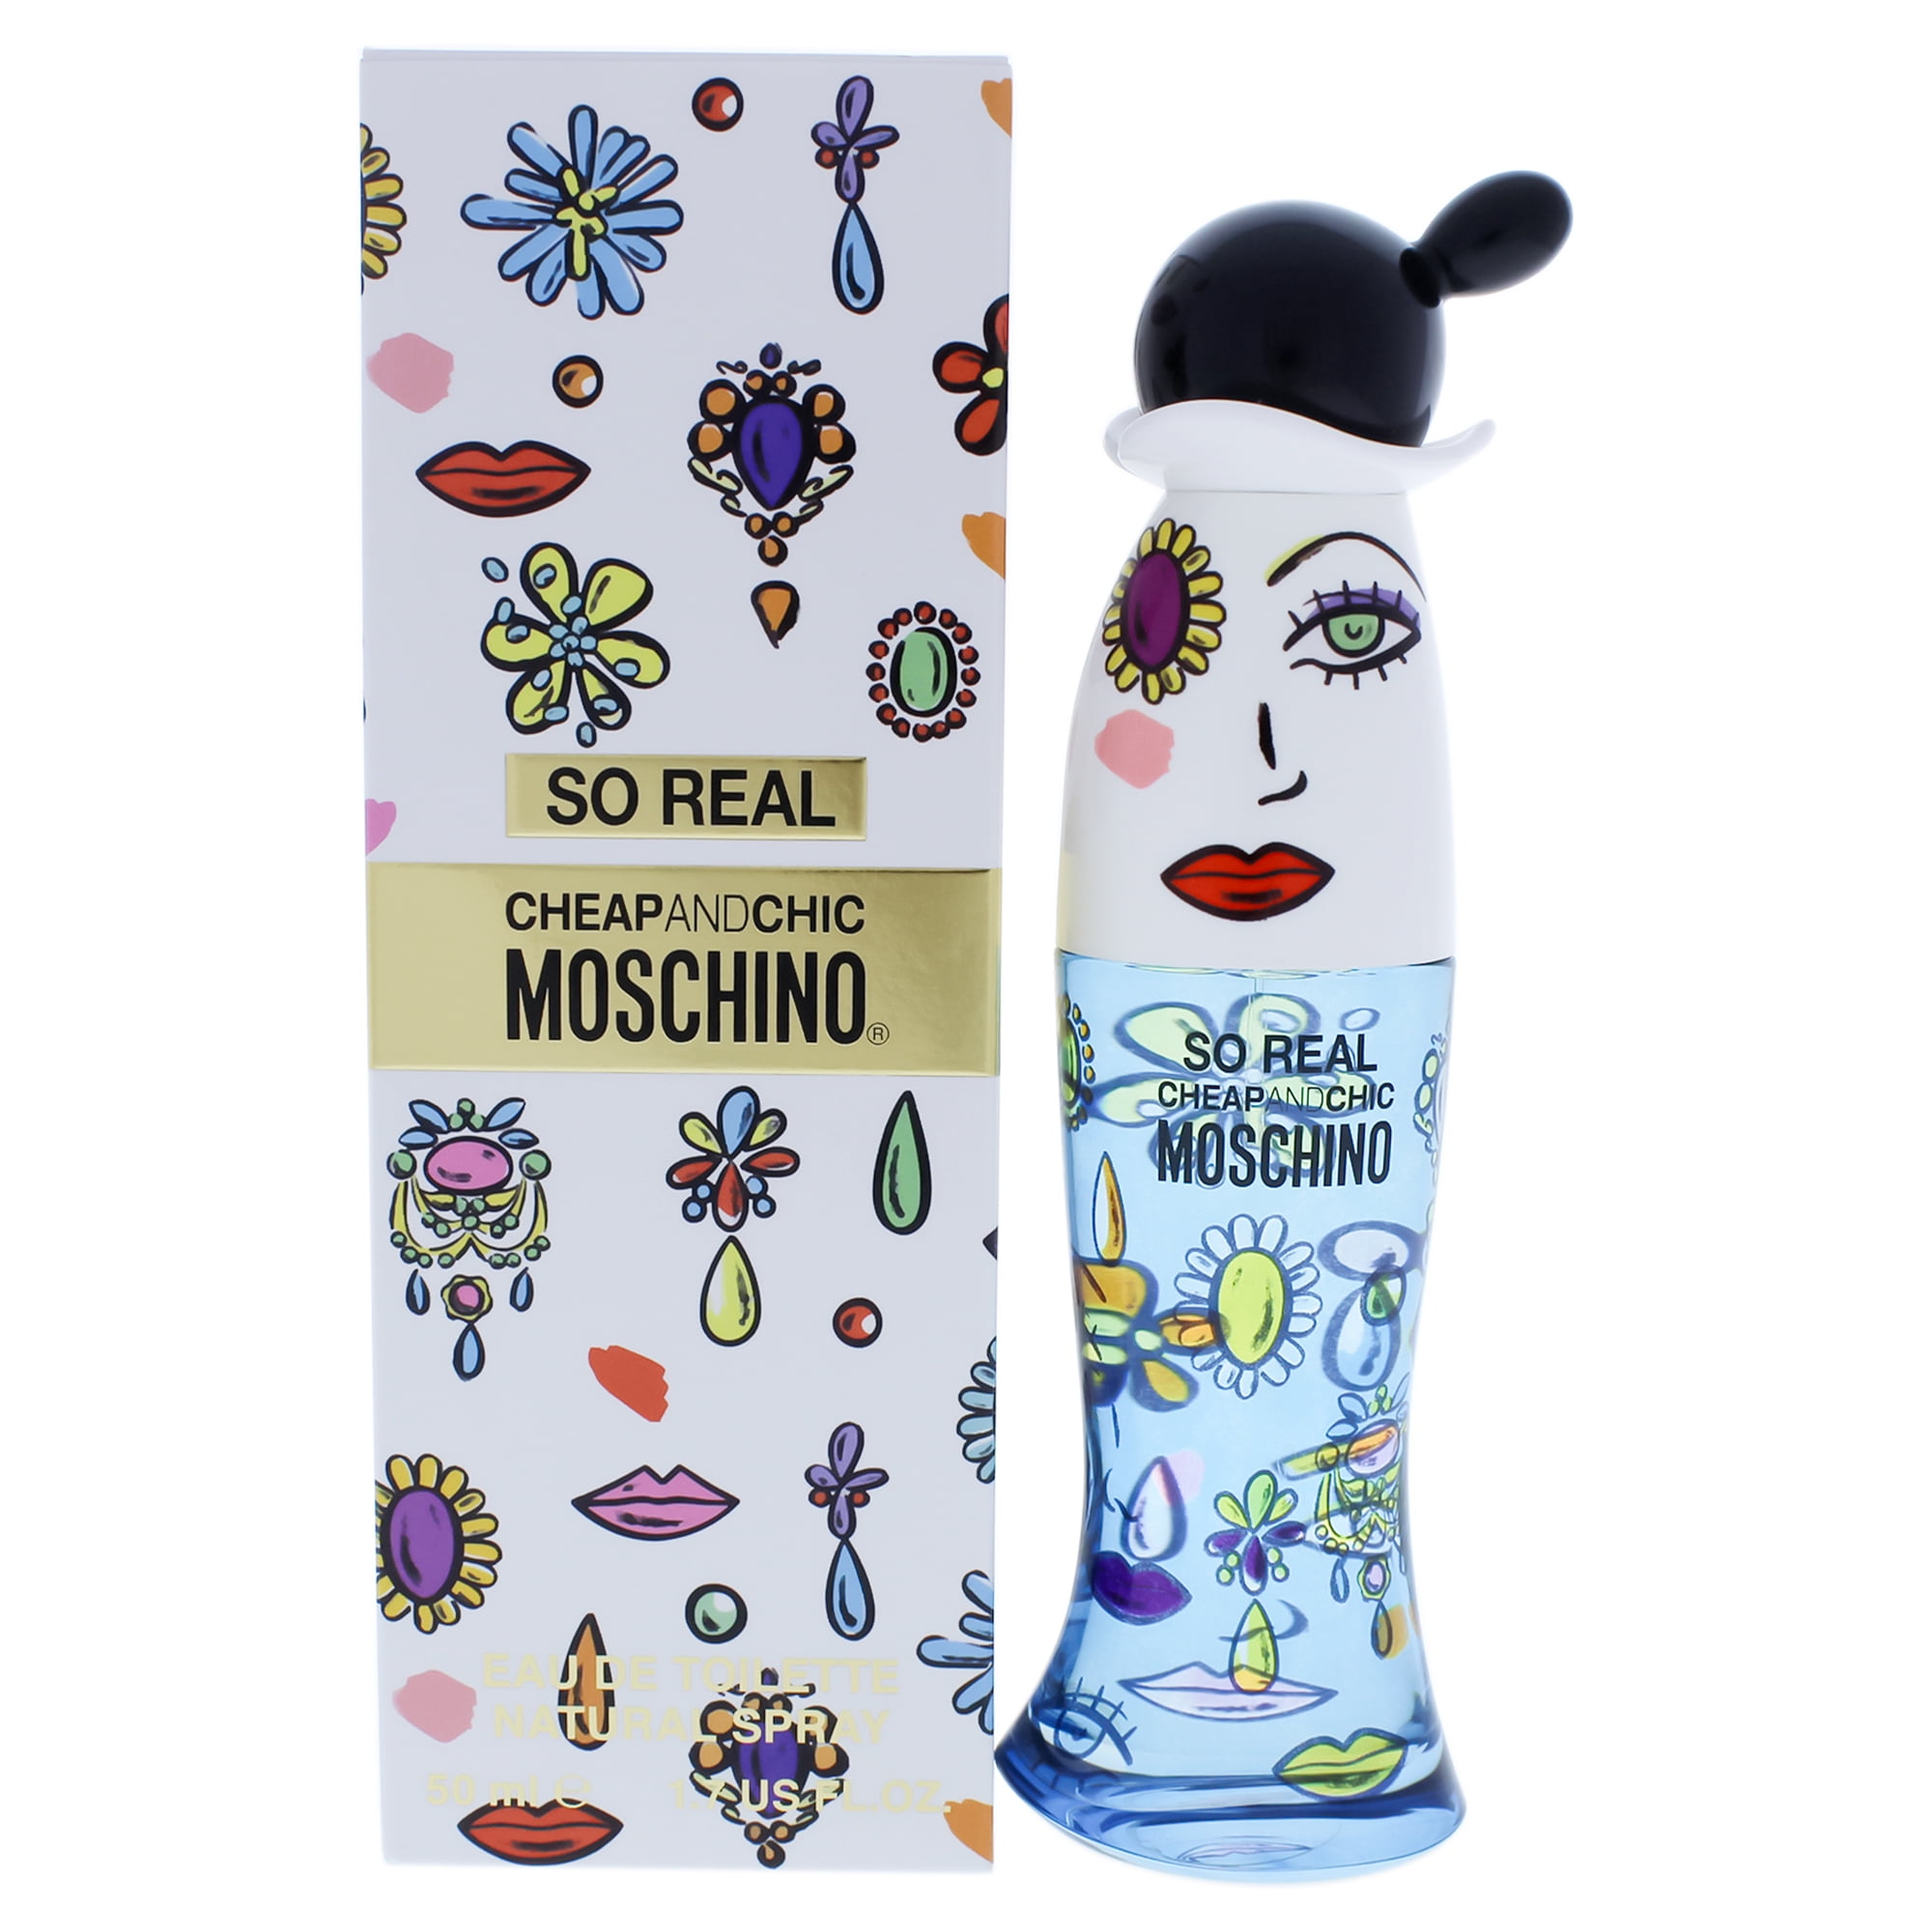 Moschino - Cheap And Chic So Real by Moschino for Women - 1.7 oz EDT ...